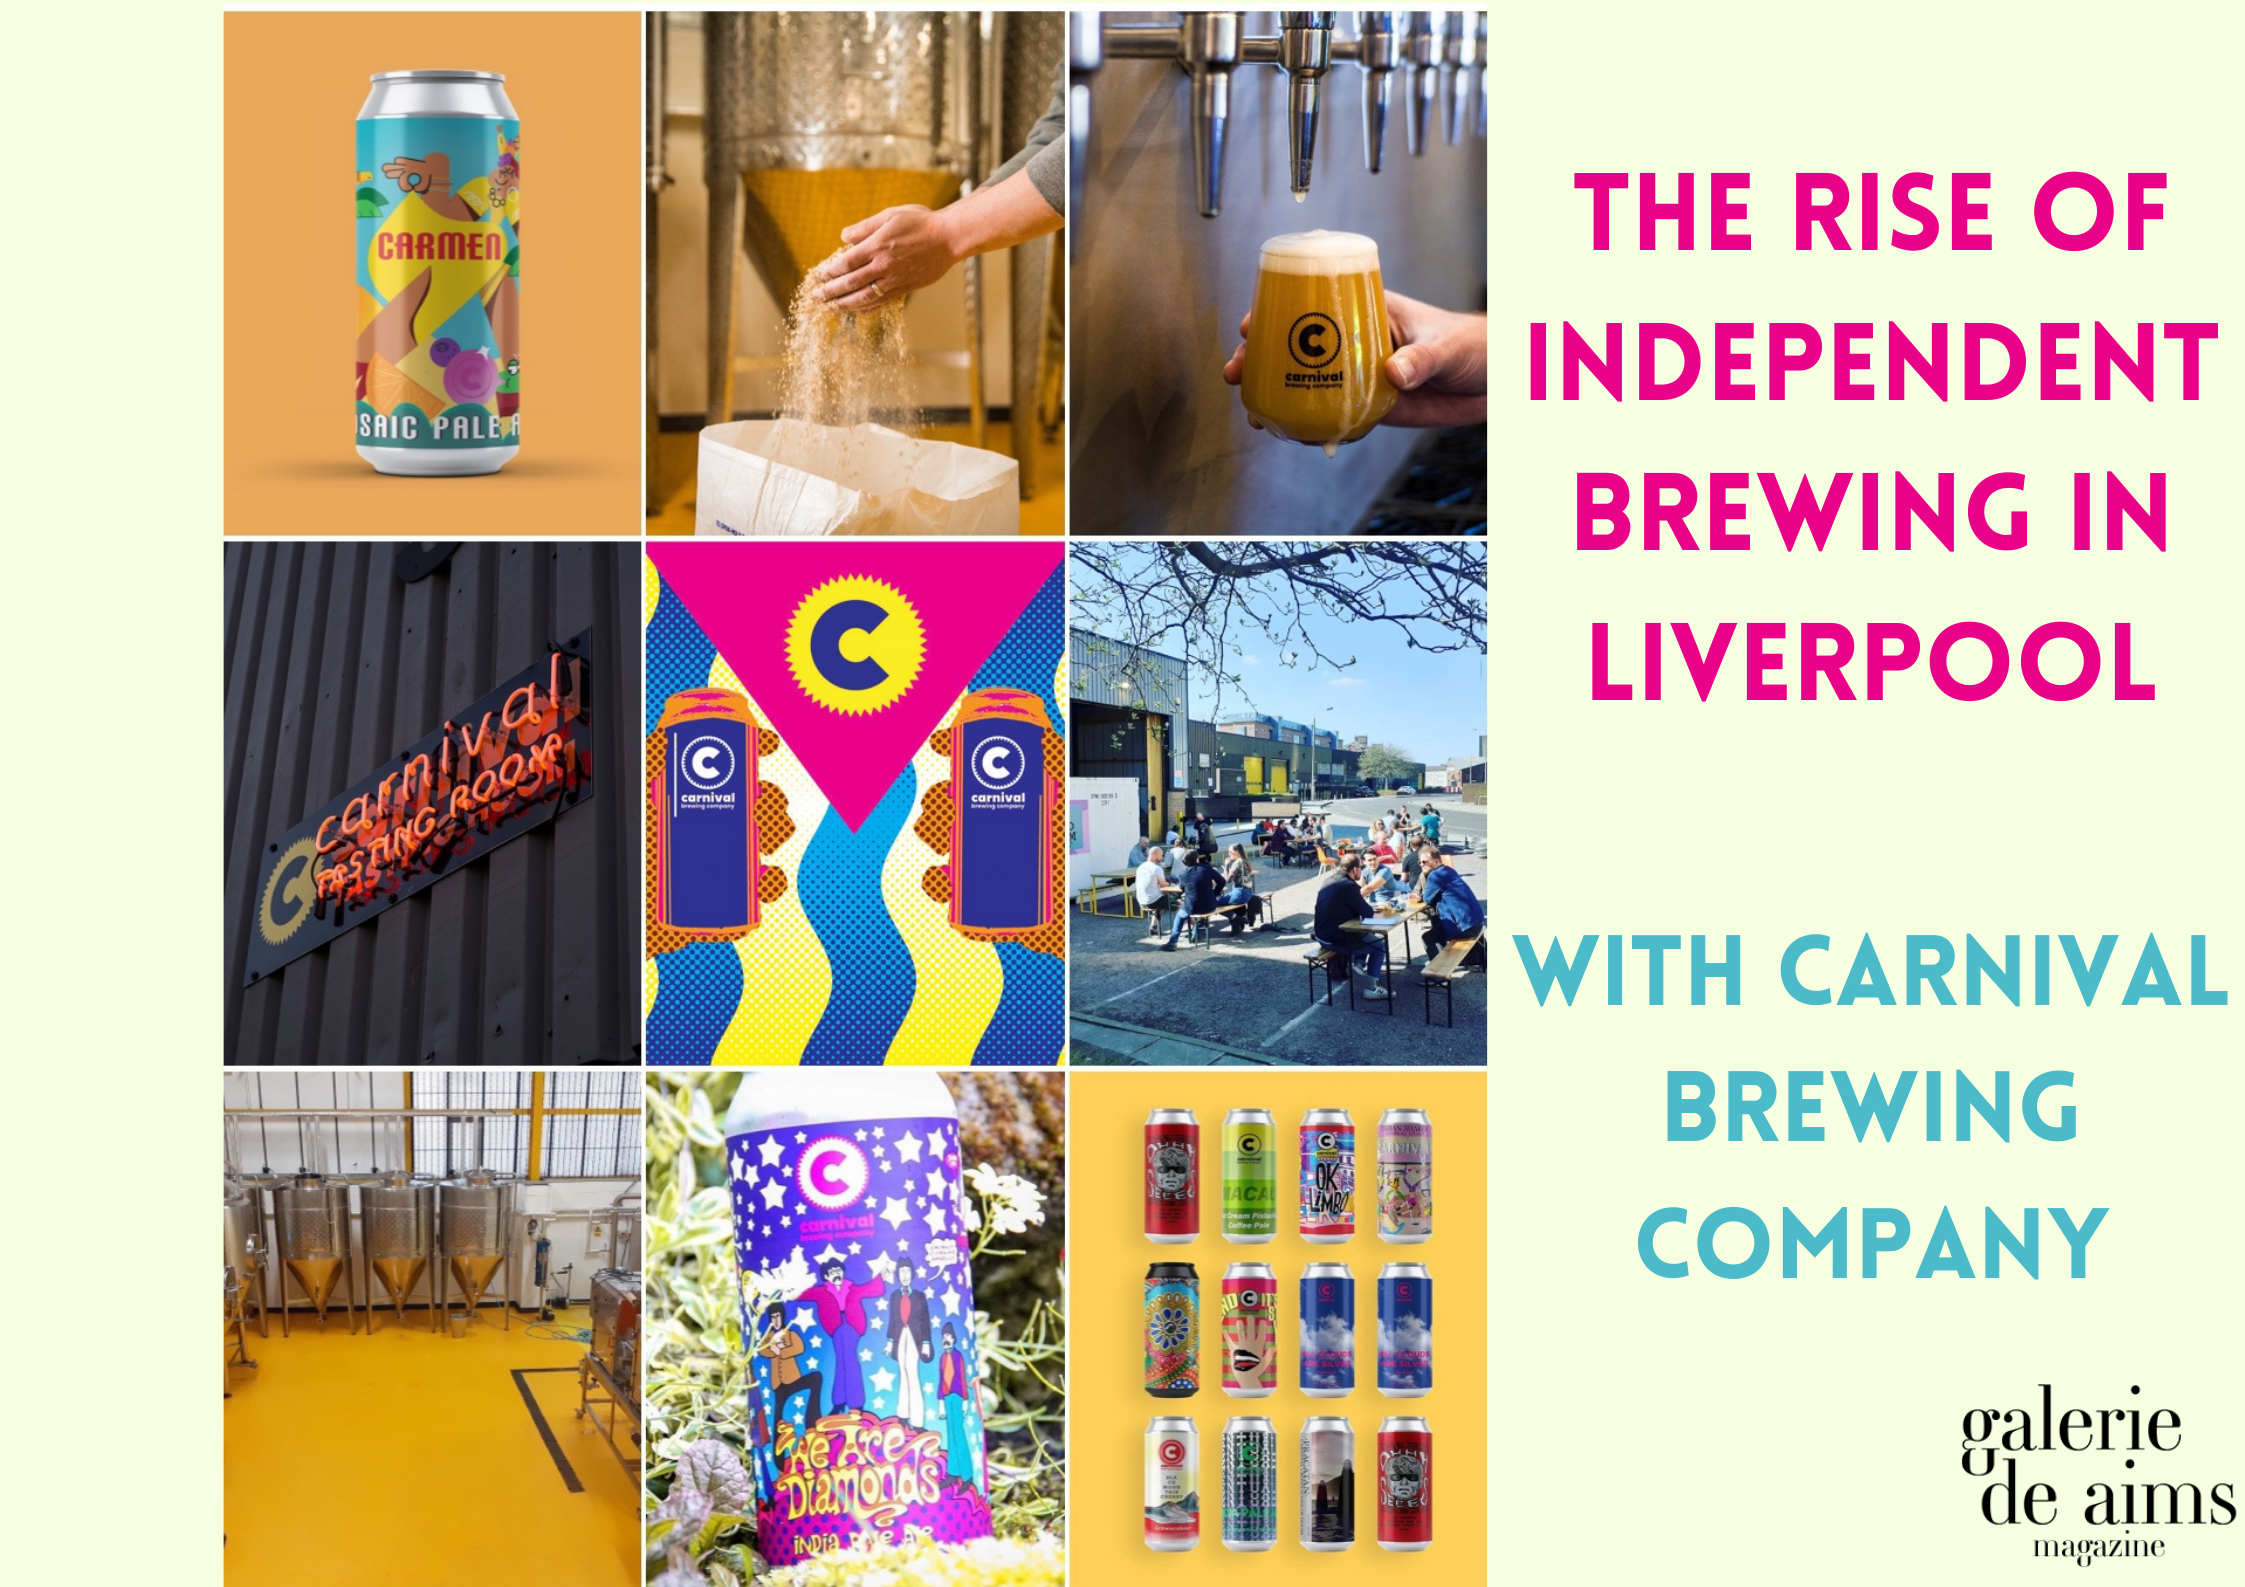 The rise of brewing in Liverpool with Carnival Brewing Company